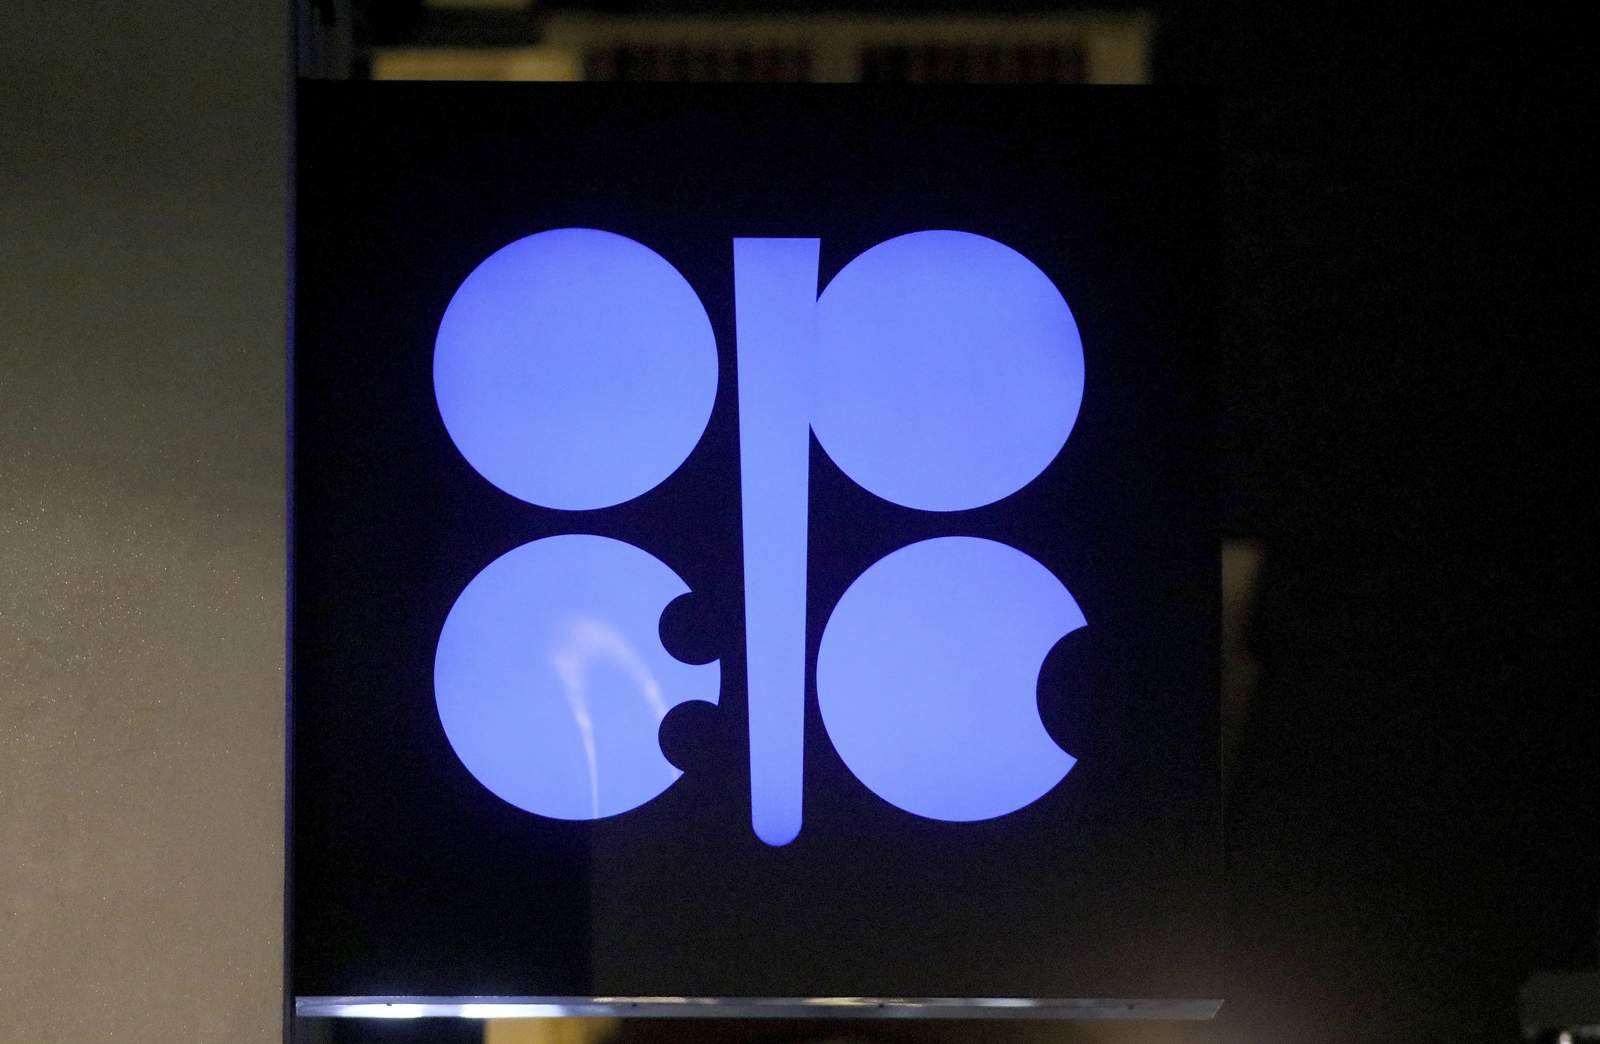 OPEC, Russia to nudge up oil output after hit from pandemic